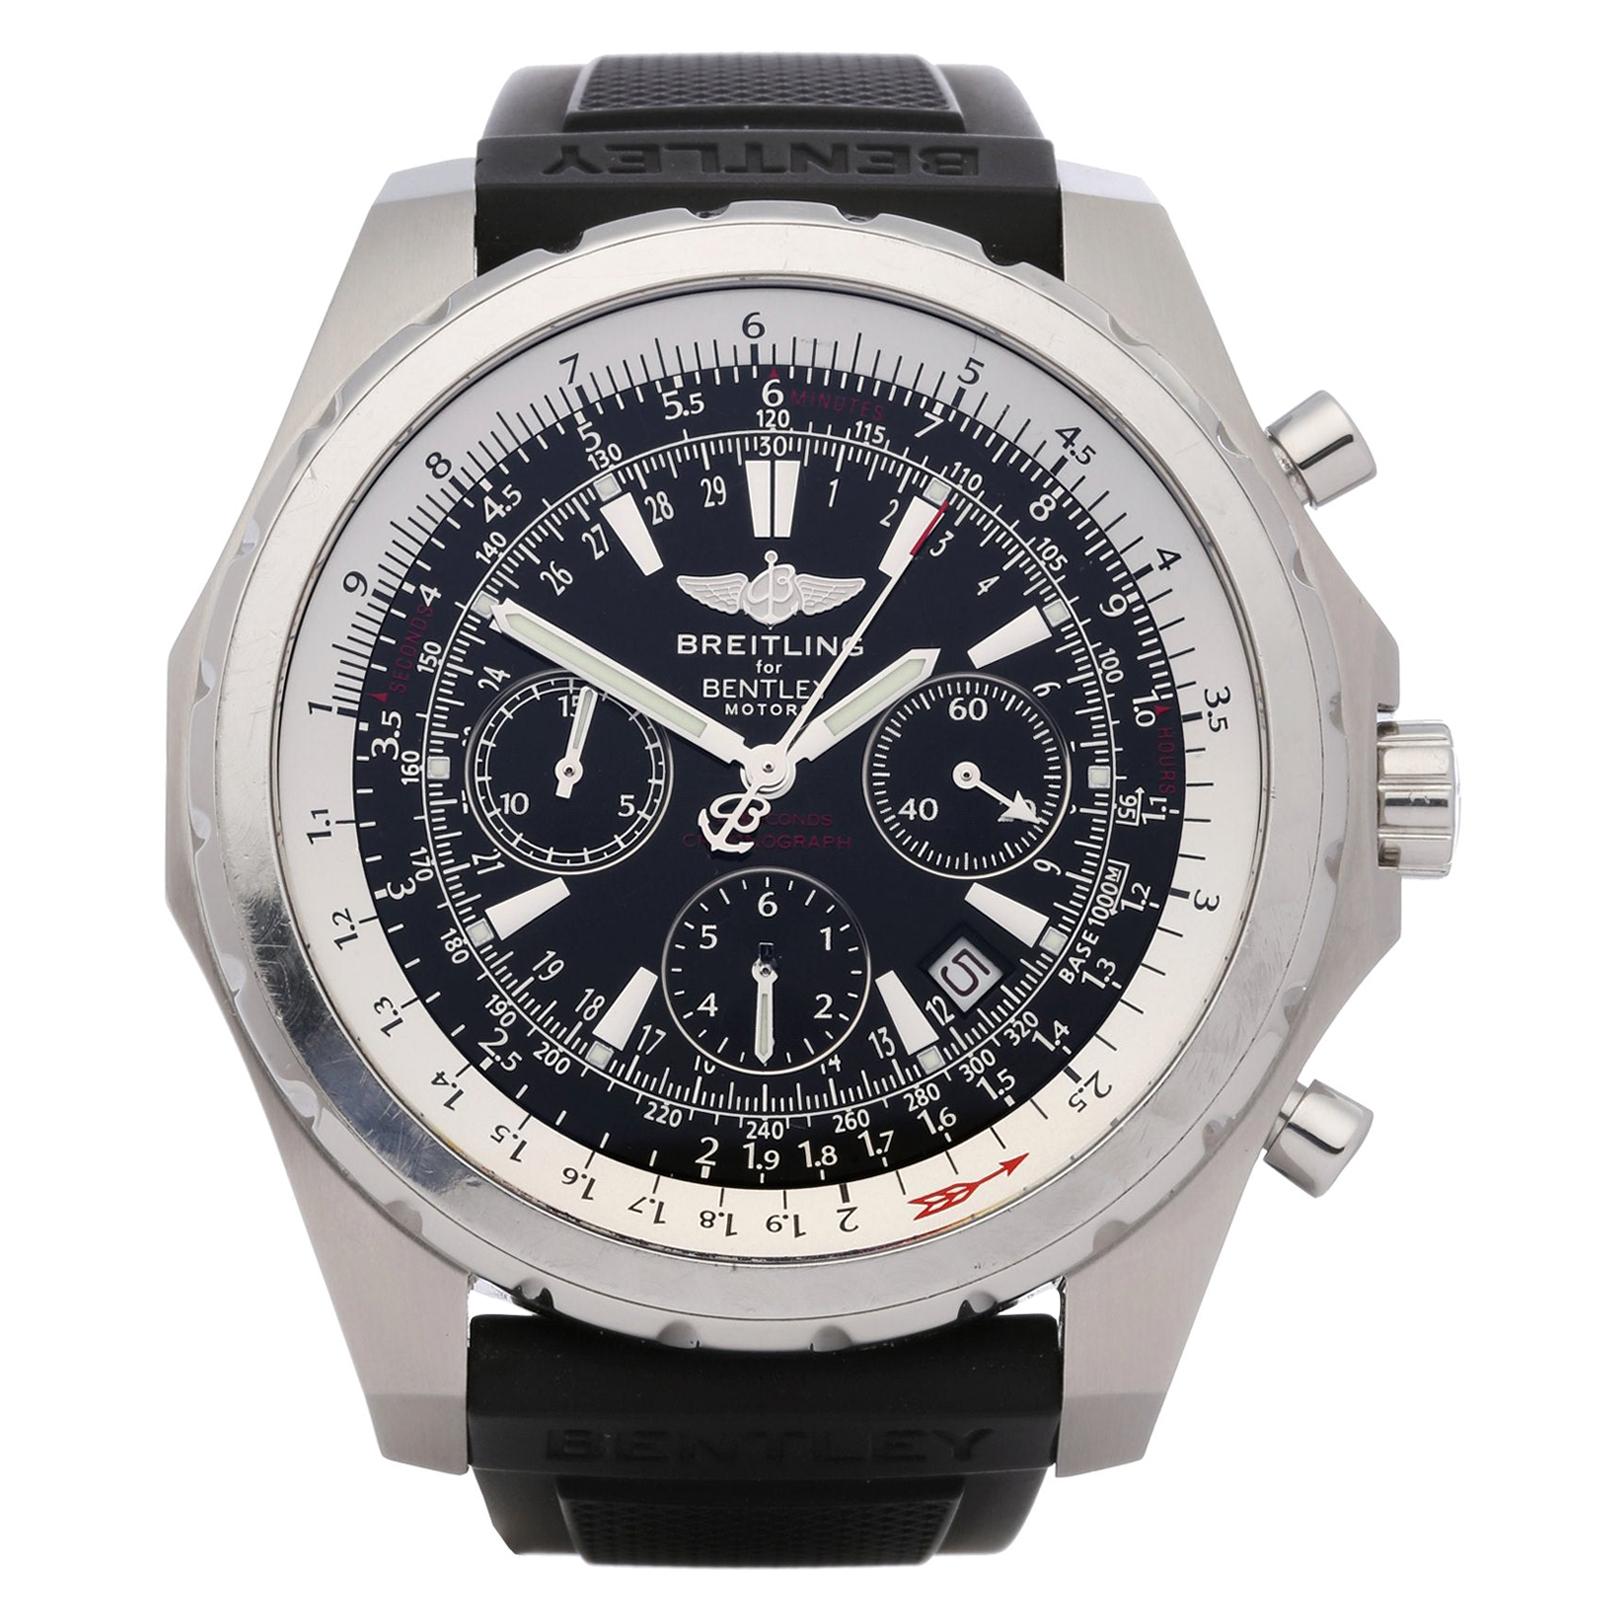 Breitling Bentley Motors T A25363 Men's Stainless Steel Chronograph Watch